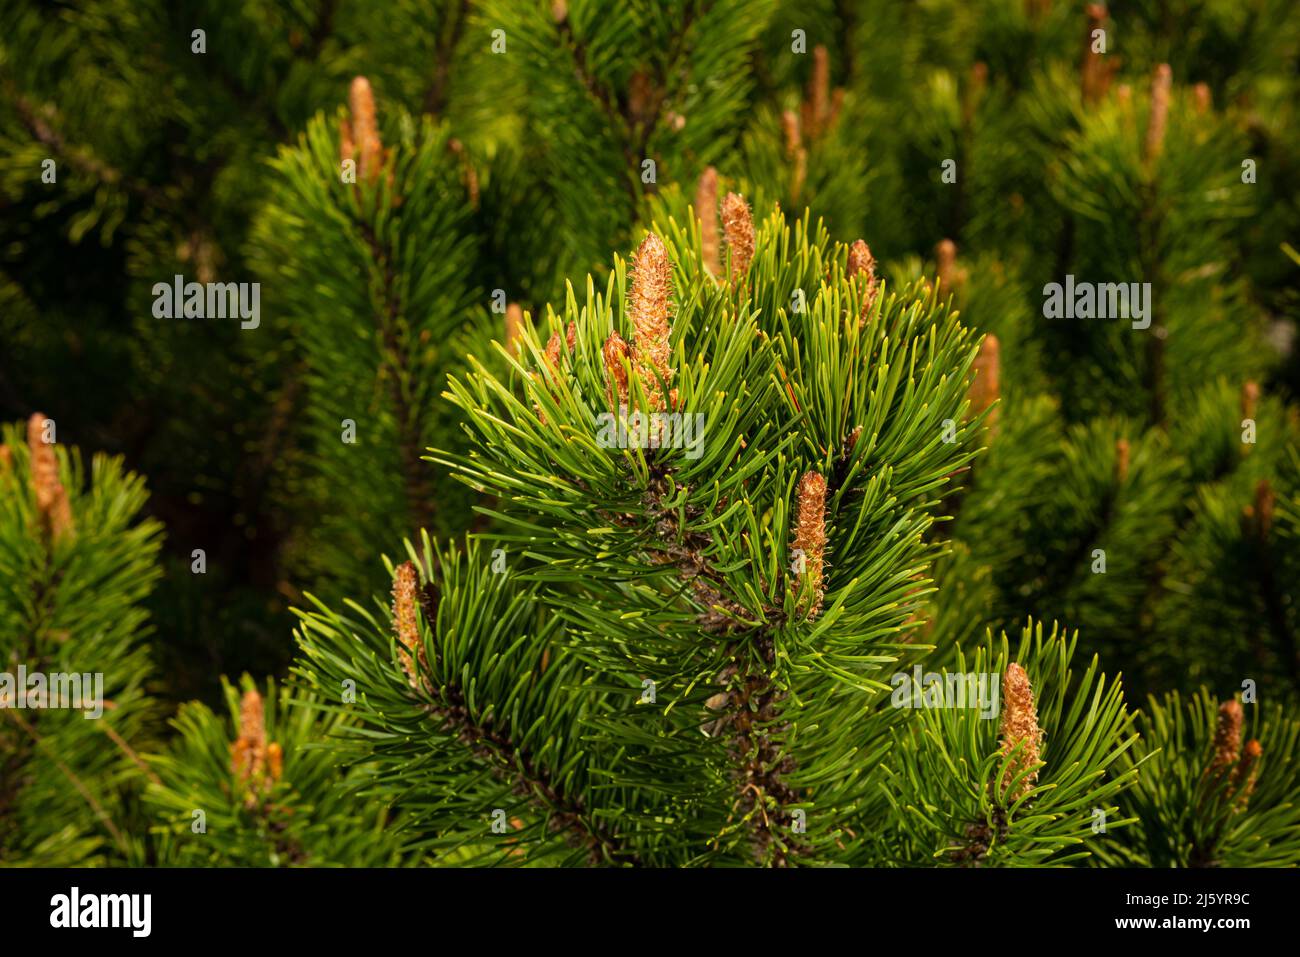 Young shoots of pine in sunny weather in the botanical garden. Stock Photo